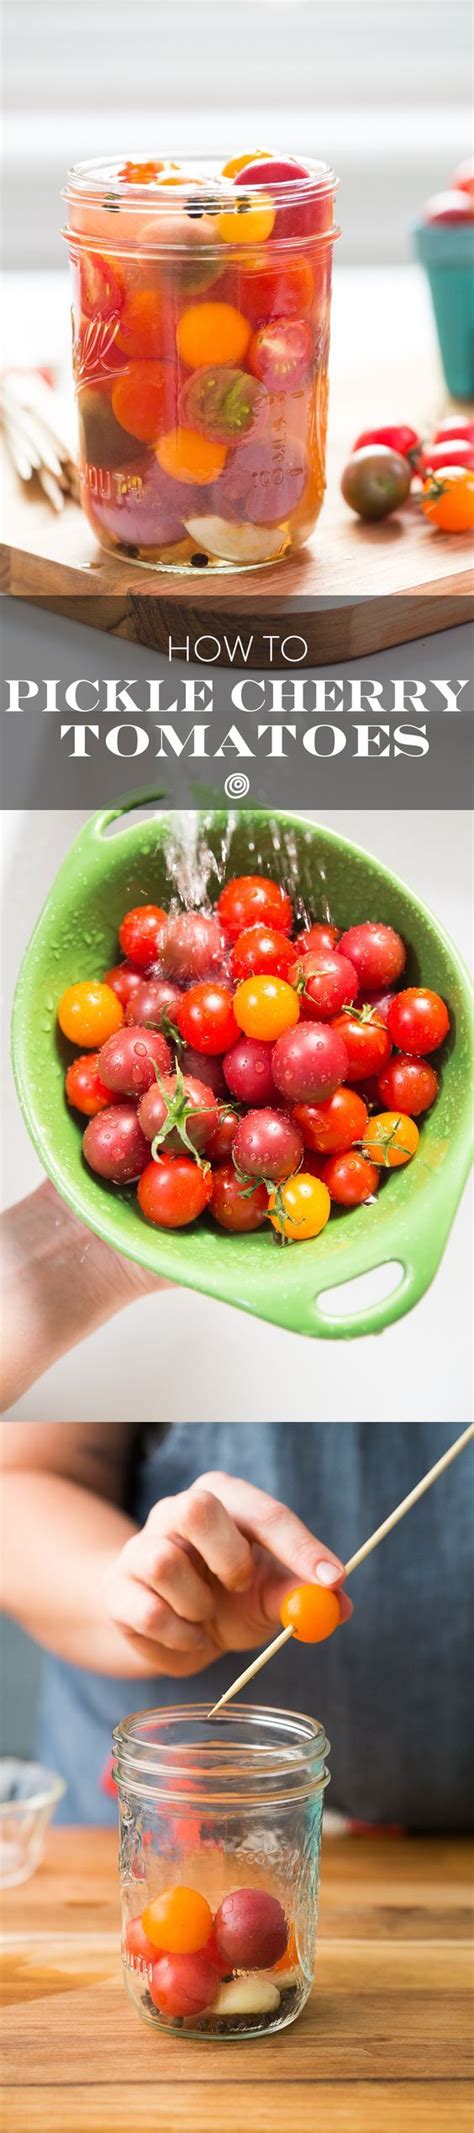 Pickled Cherry Tomatoes Are A Delicious And Simple Way To Use Up A